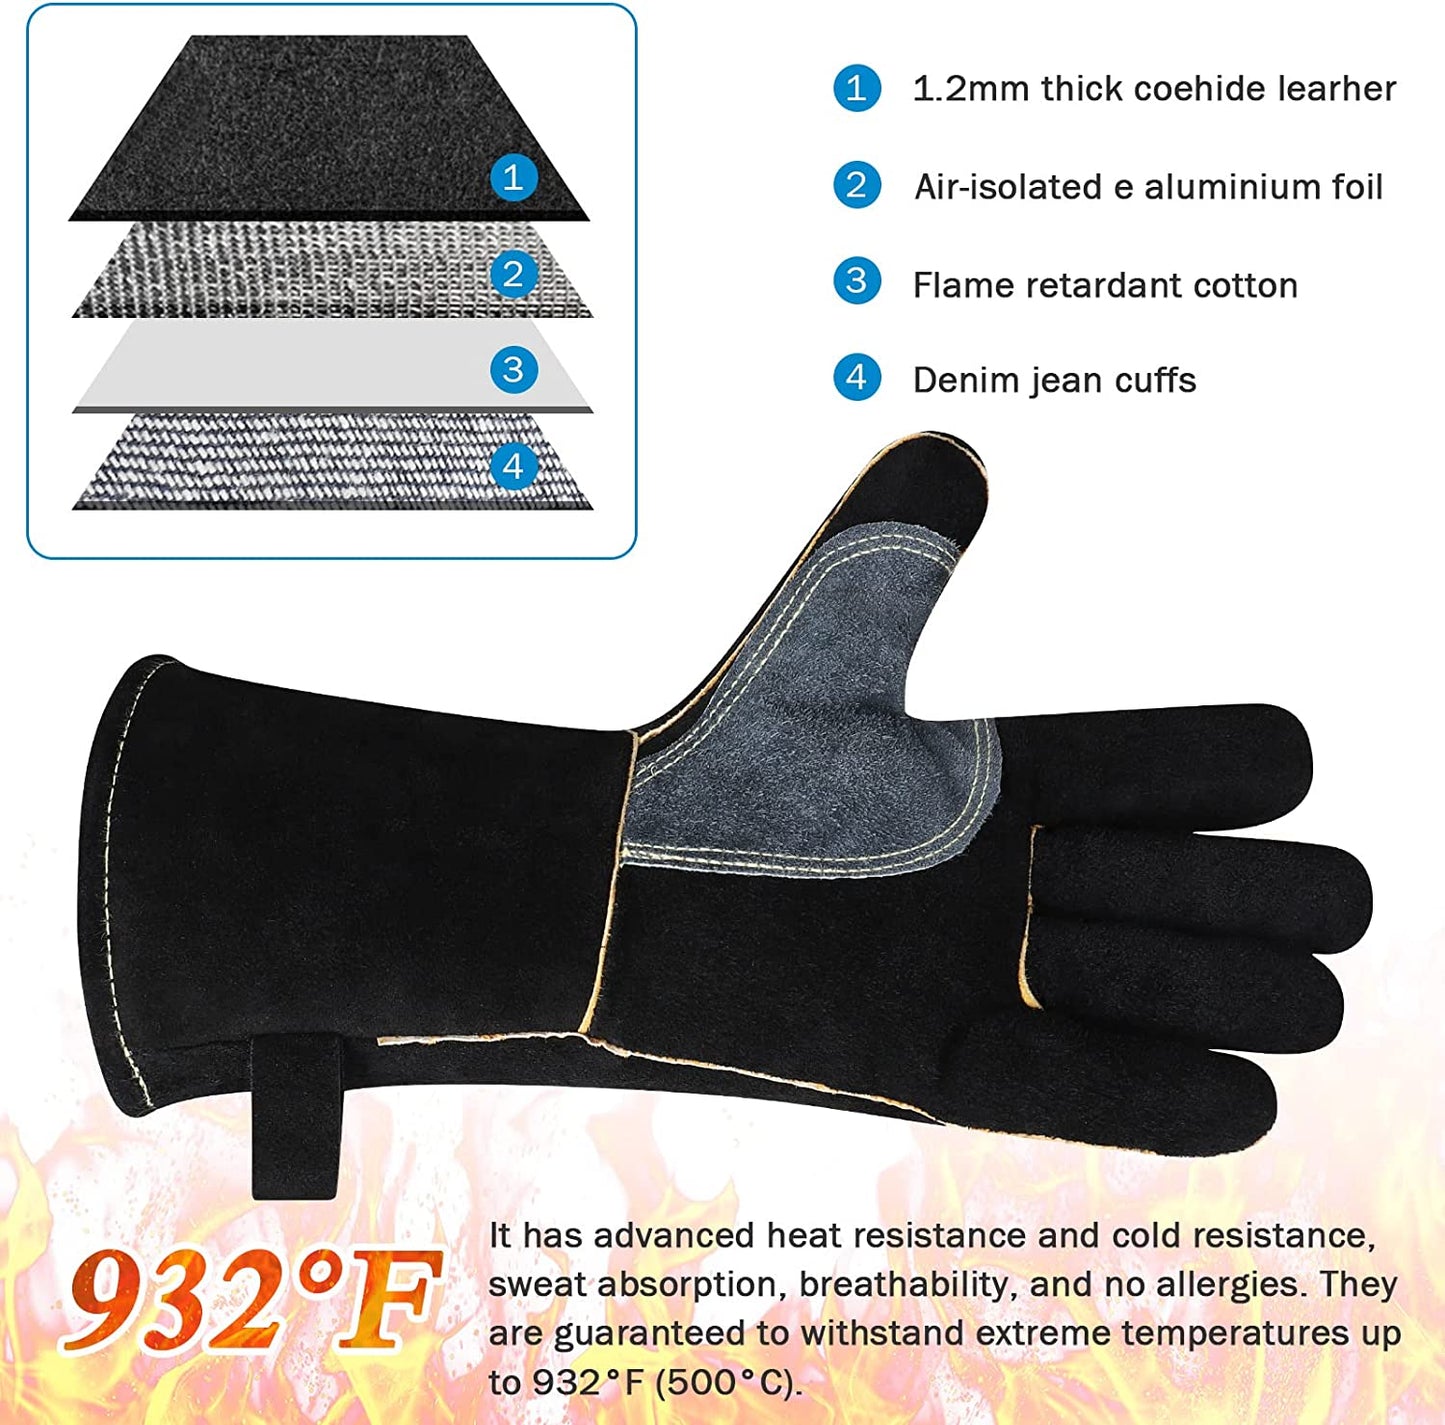 14 Inches Leather Welding Gloves,Heat Resistant